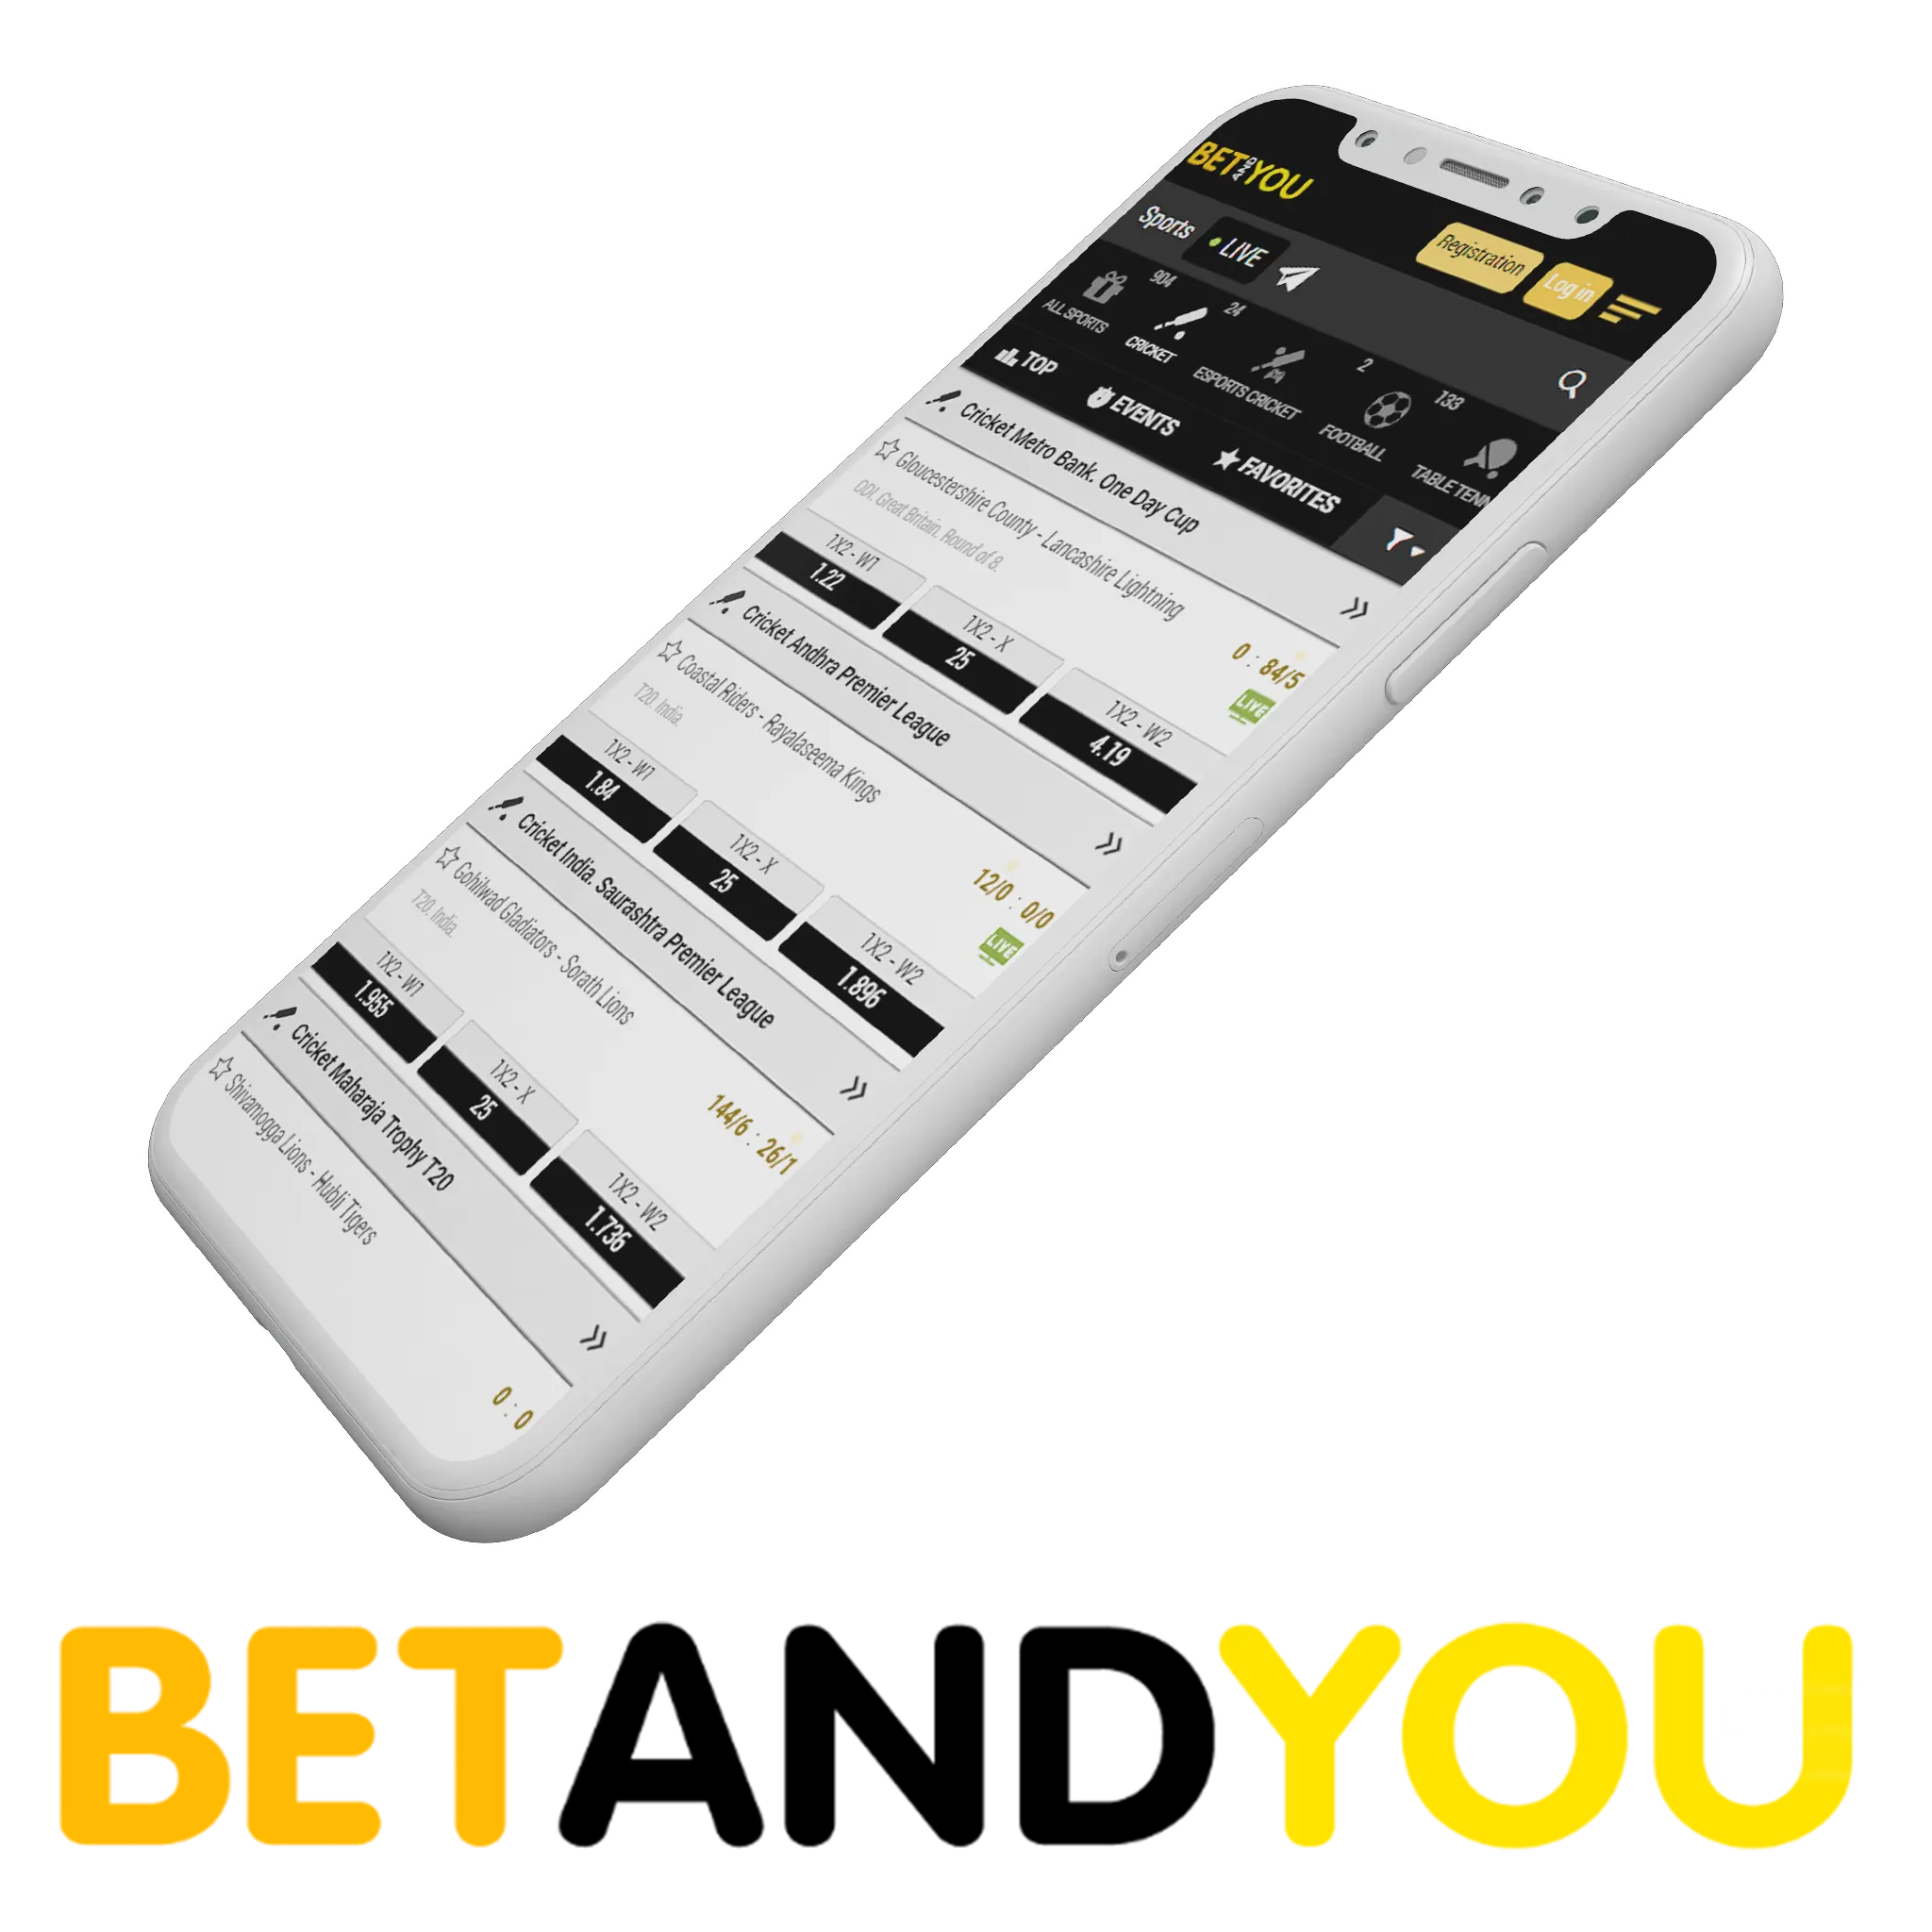 Introducing the Betandyou mobile app, a pinnacle of excellence in the realm of IPL betting.